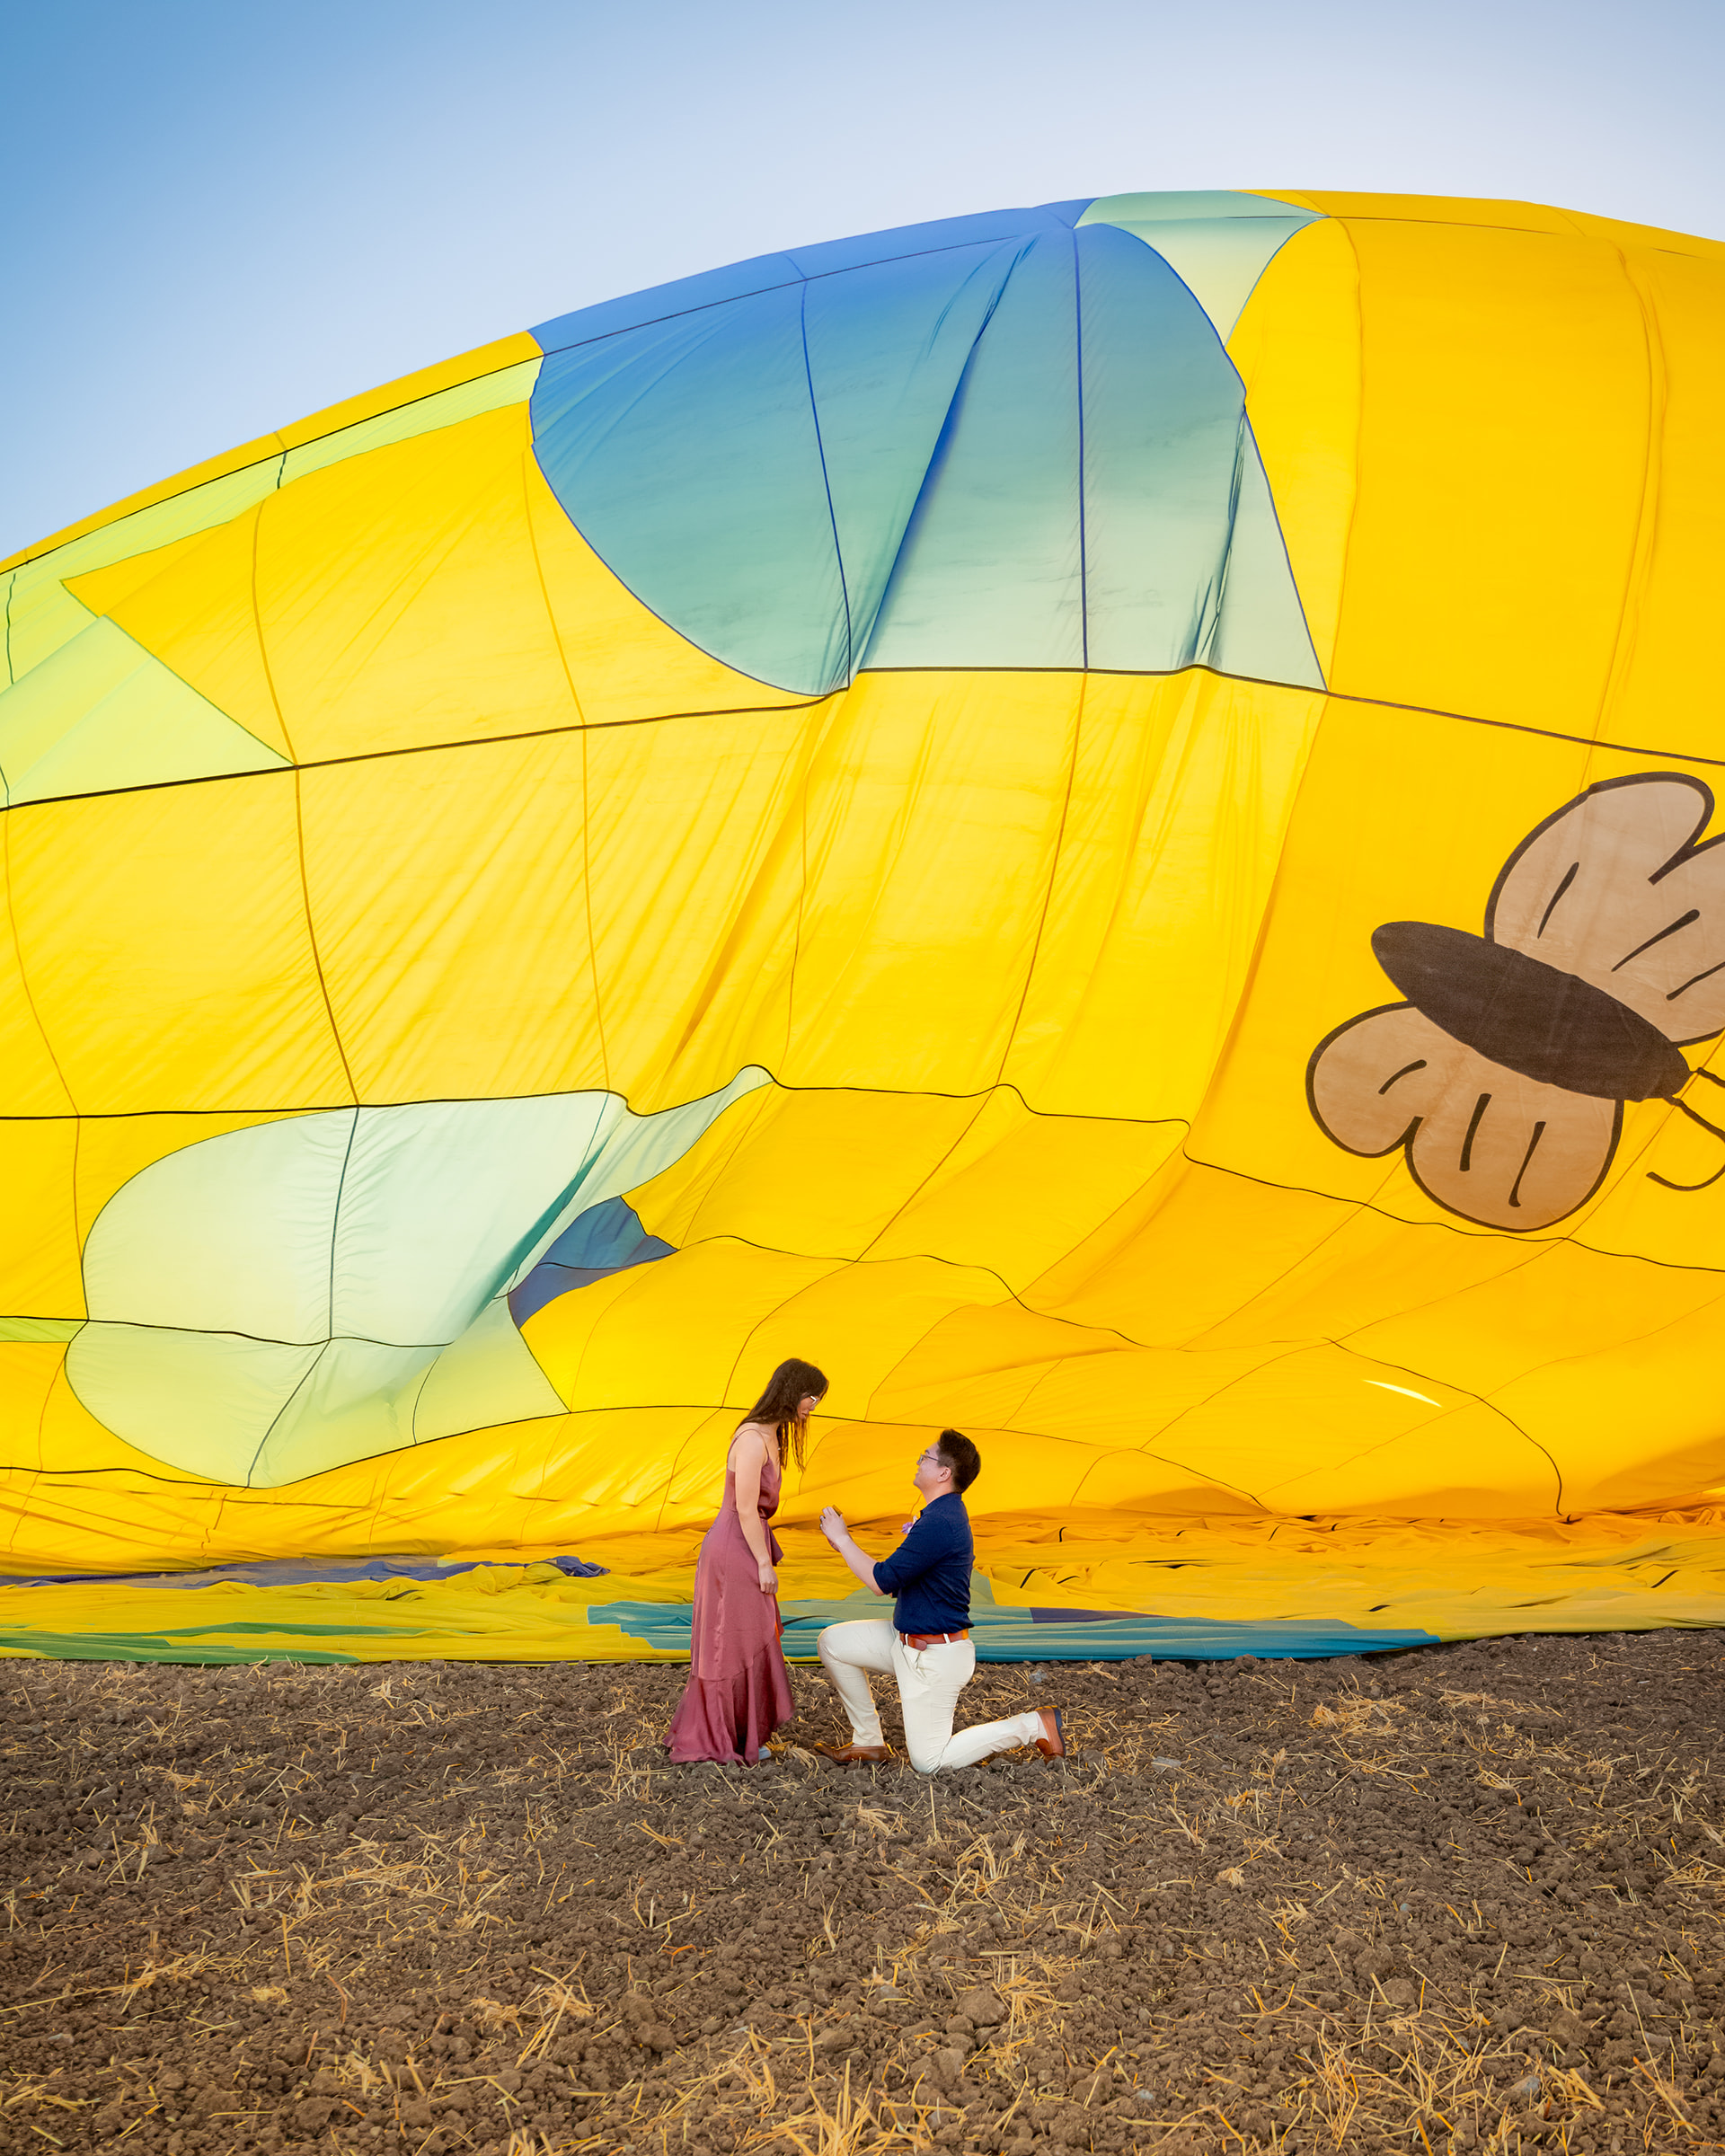 nonbinary person proposing to their fiancée in front of a yellow hot air balloon